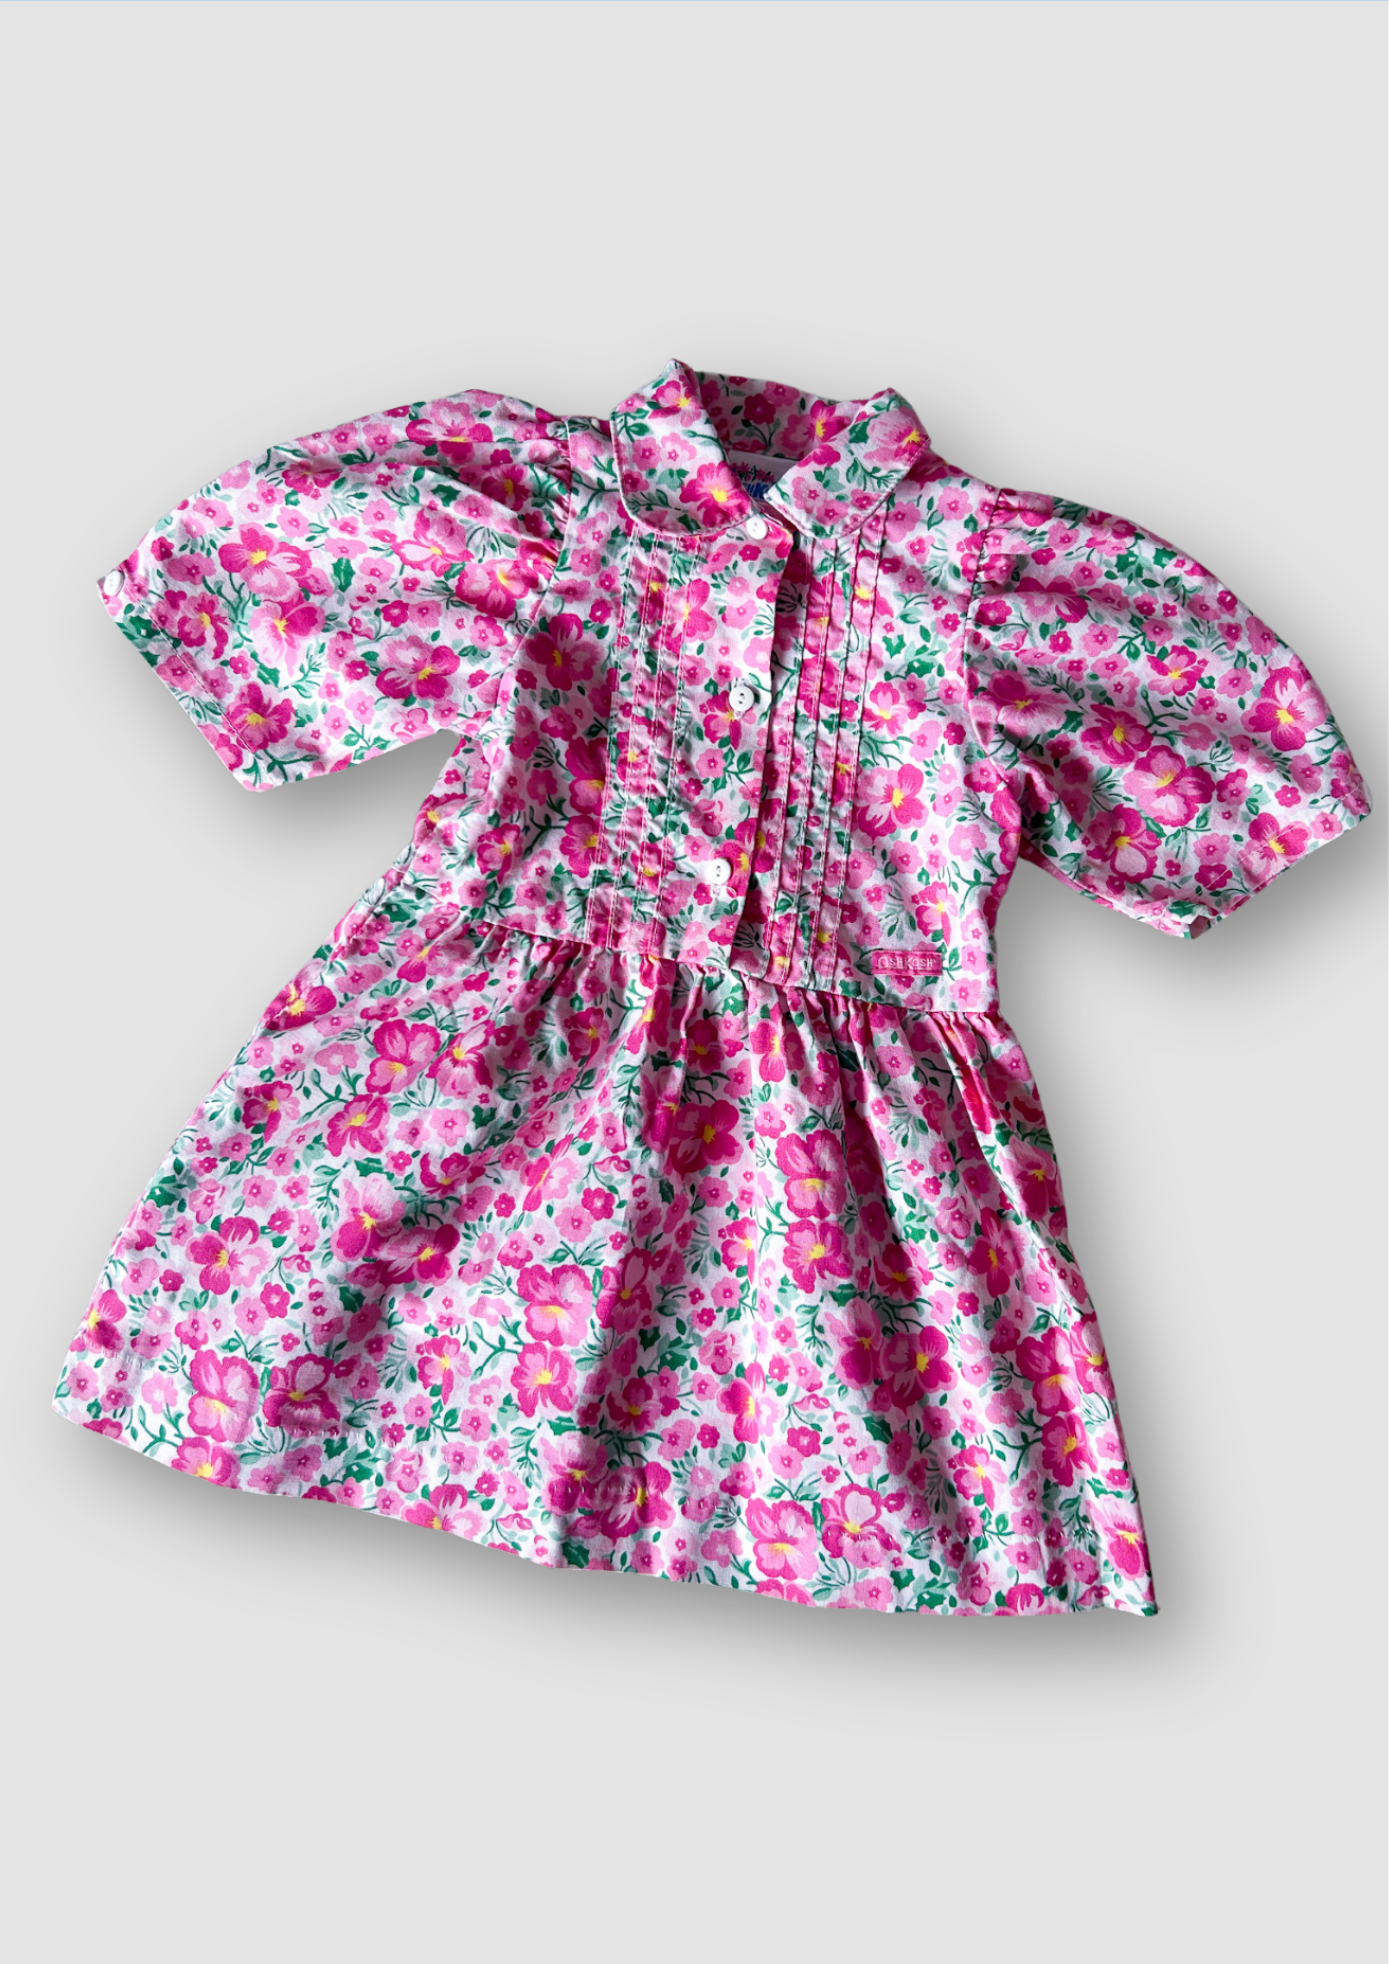 Vintage OshKosh Floral Dress, approx 3 years